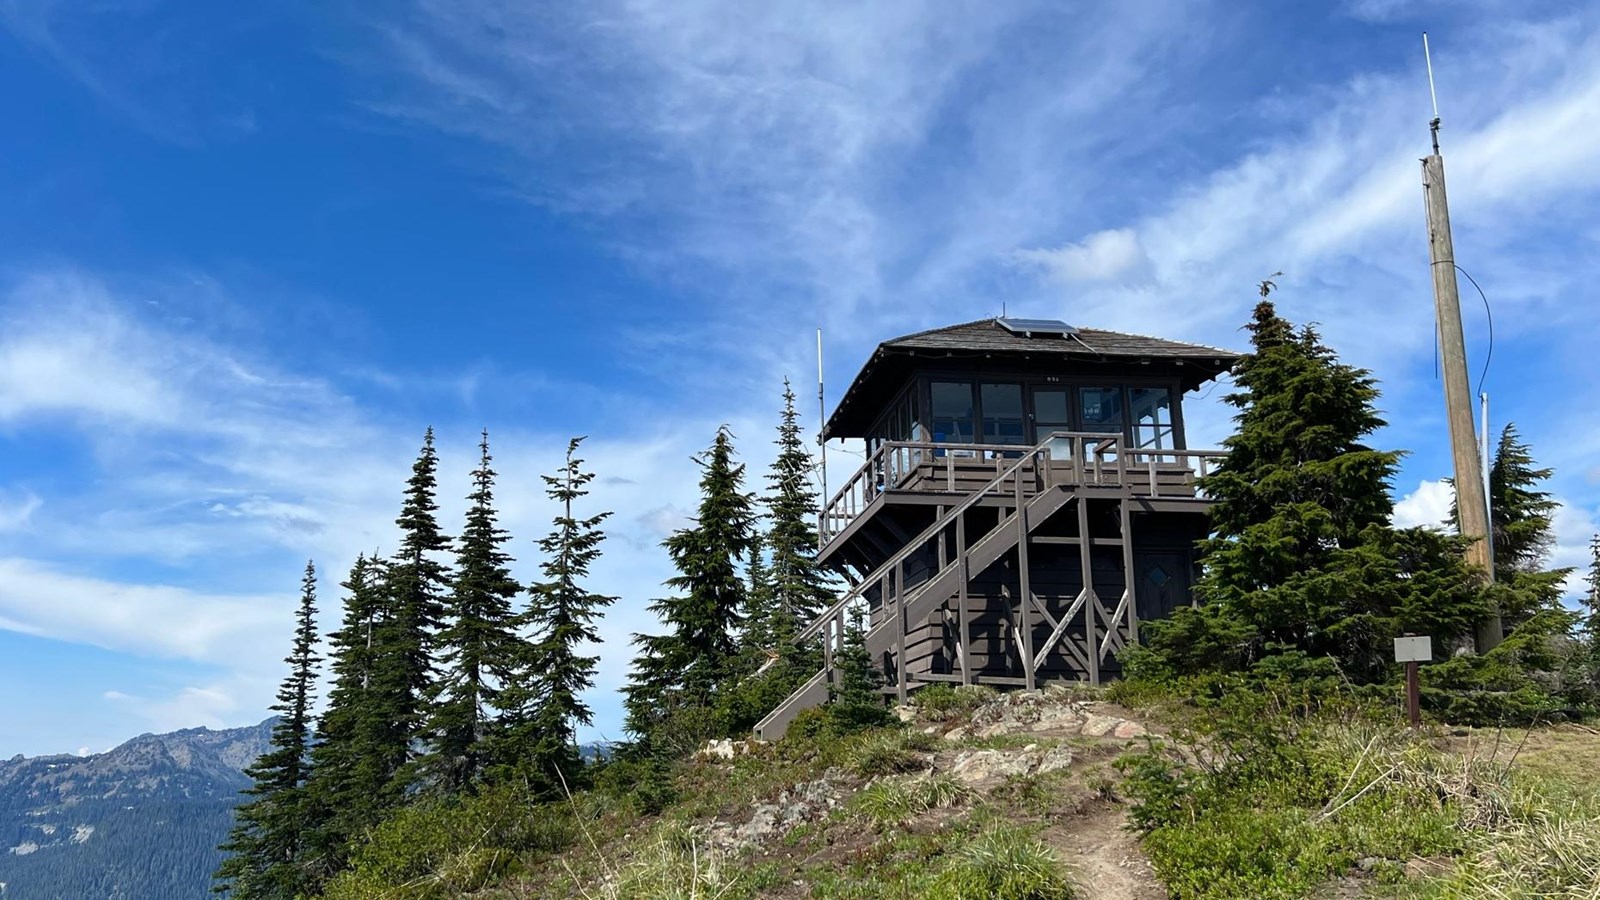 Historic wooden fire lookout painted dark brown sits upon a grassy hillside surrounded by trees